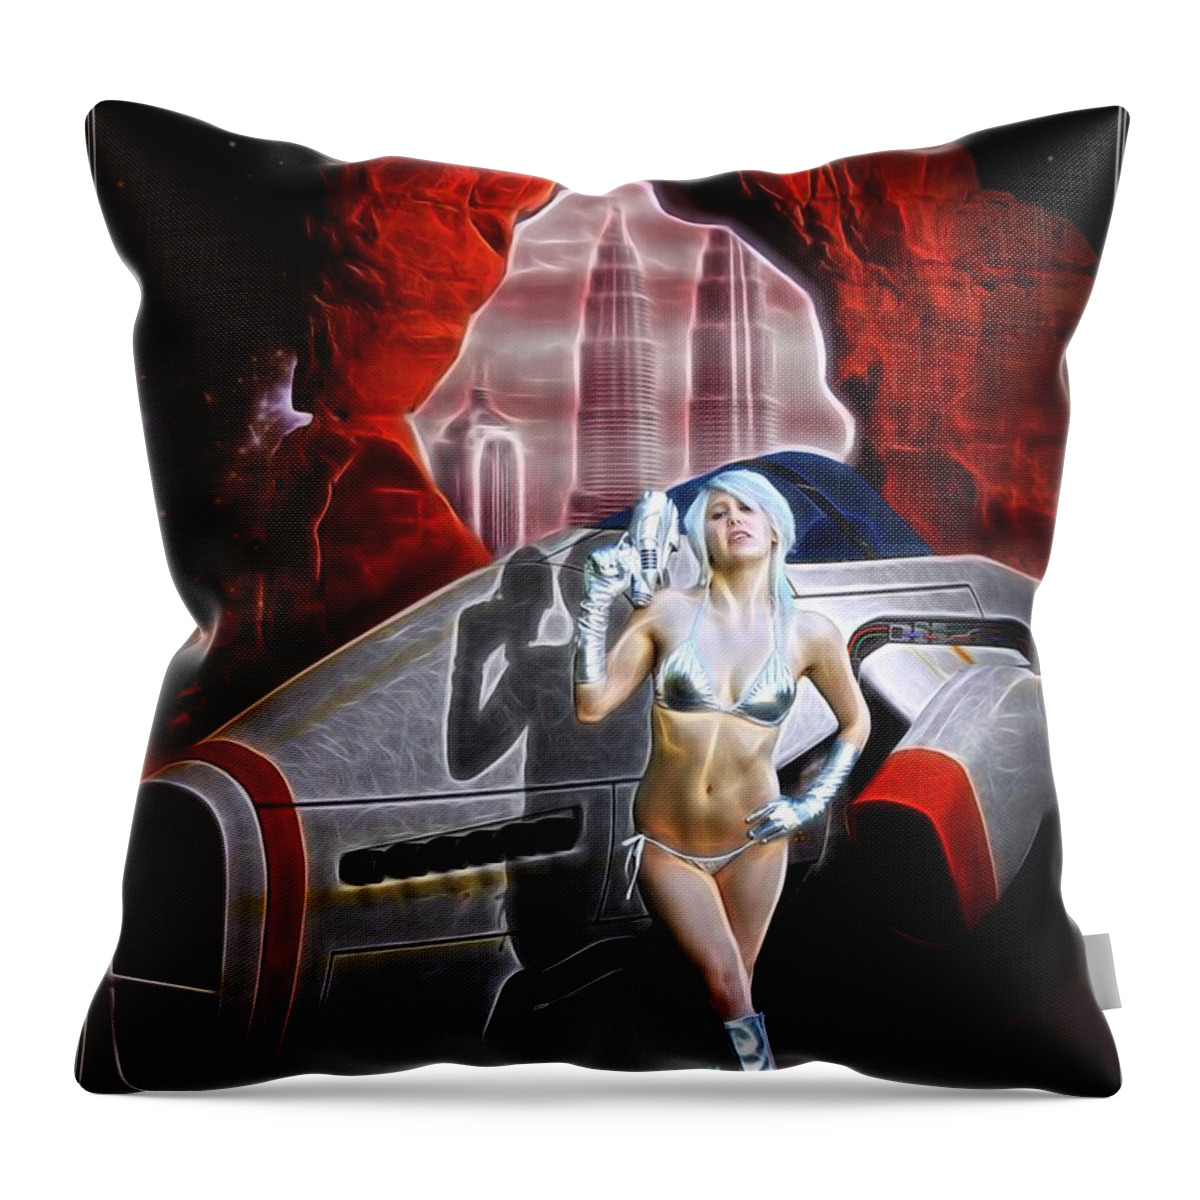 Fantasy Throw Pillow featuring the painting Time And Space Portal by Jon Volden